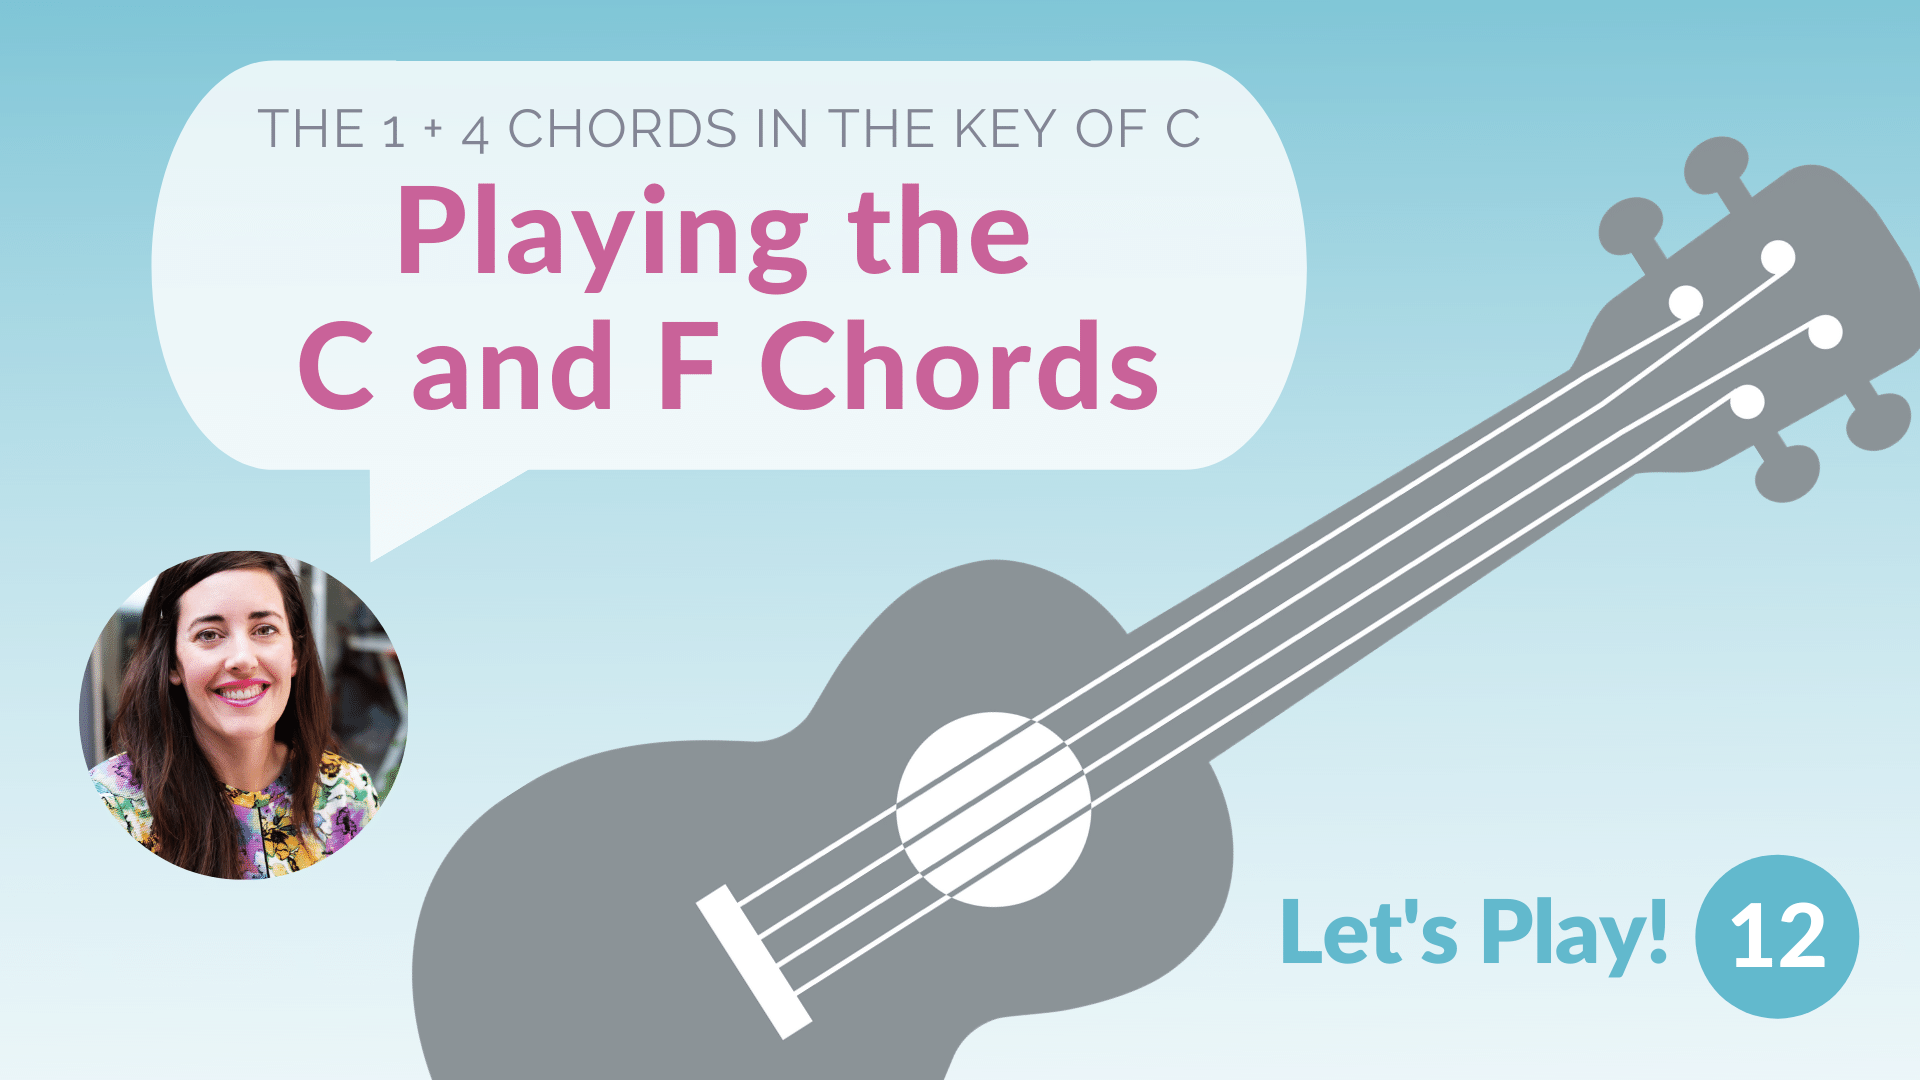 Play the 1 + 4 Chords in the Key of C